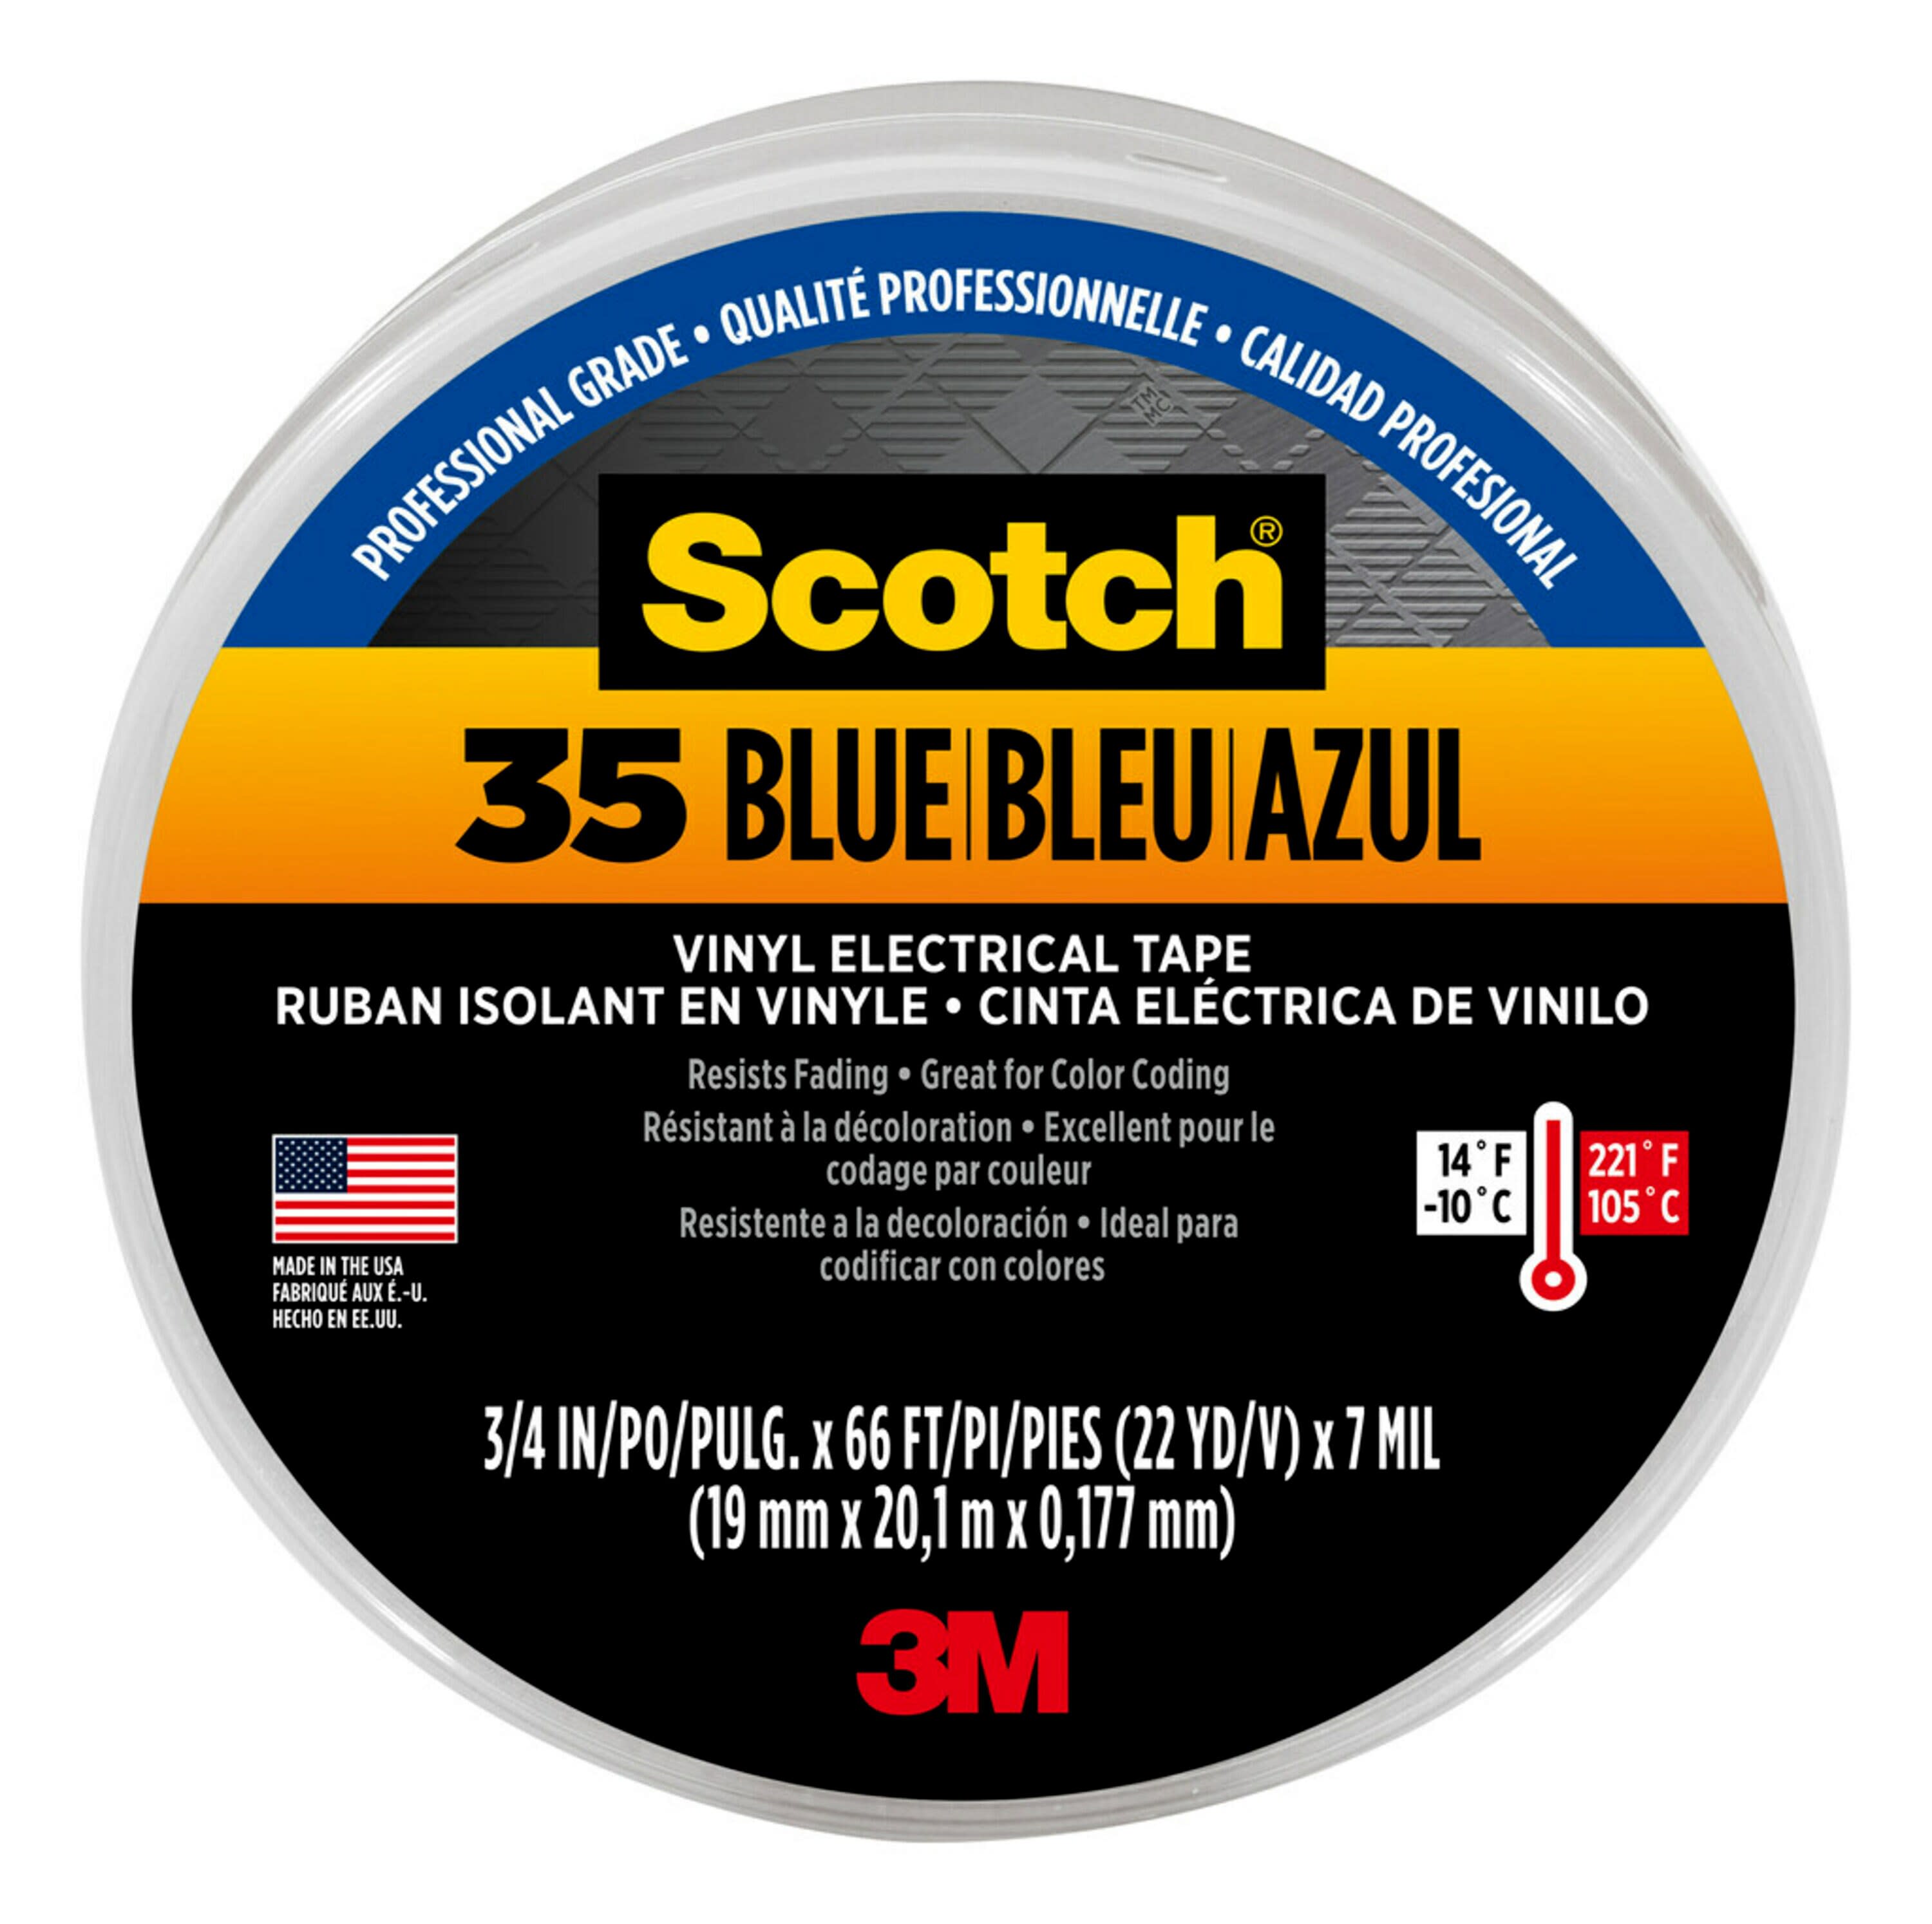 Scotch #35 Blue 0.75-in x 66-ft Vinyl Electrical Tape Blue in the